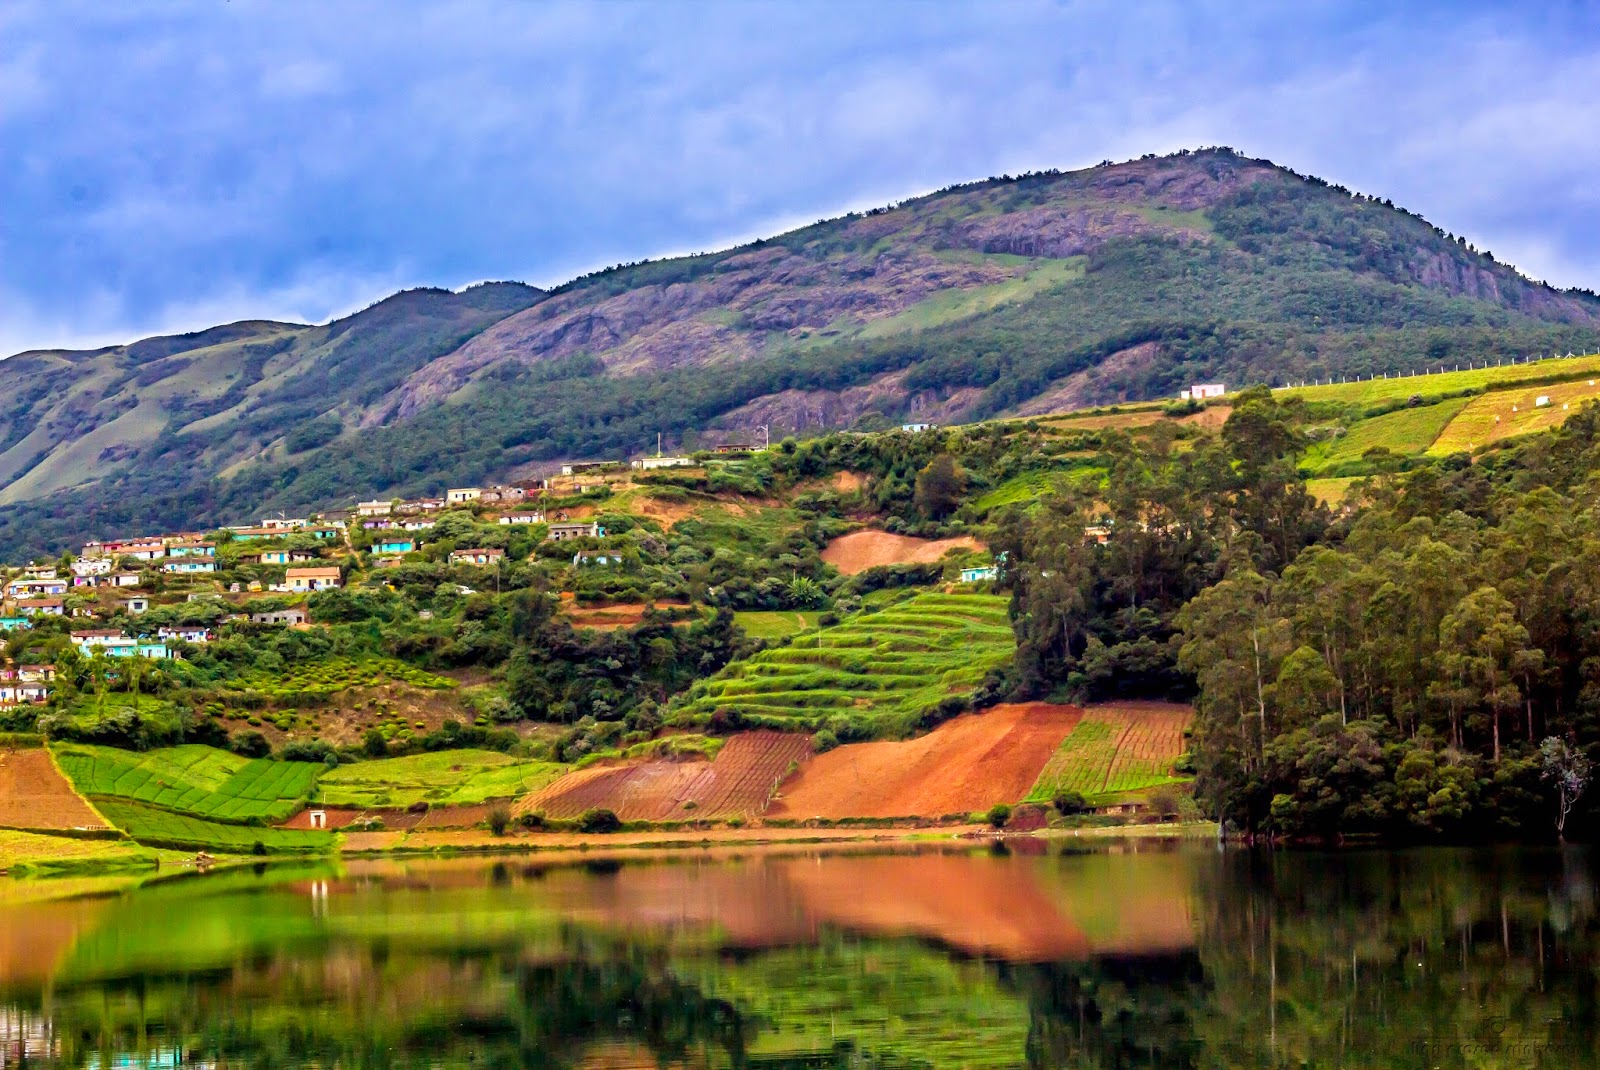 Landscape photo near Avalanche lake Ooty with a mountain in the background and houses on the slope. Lake in the foreground.